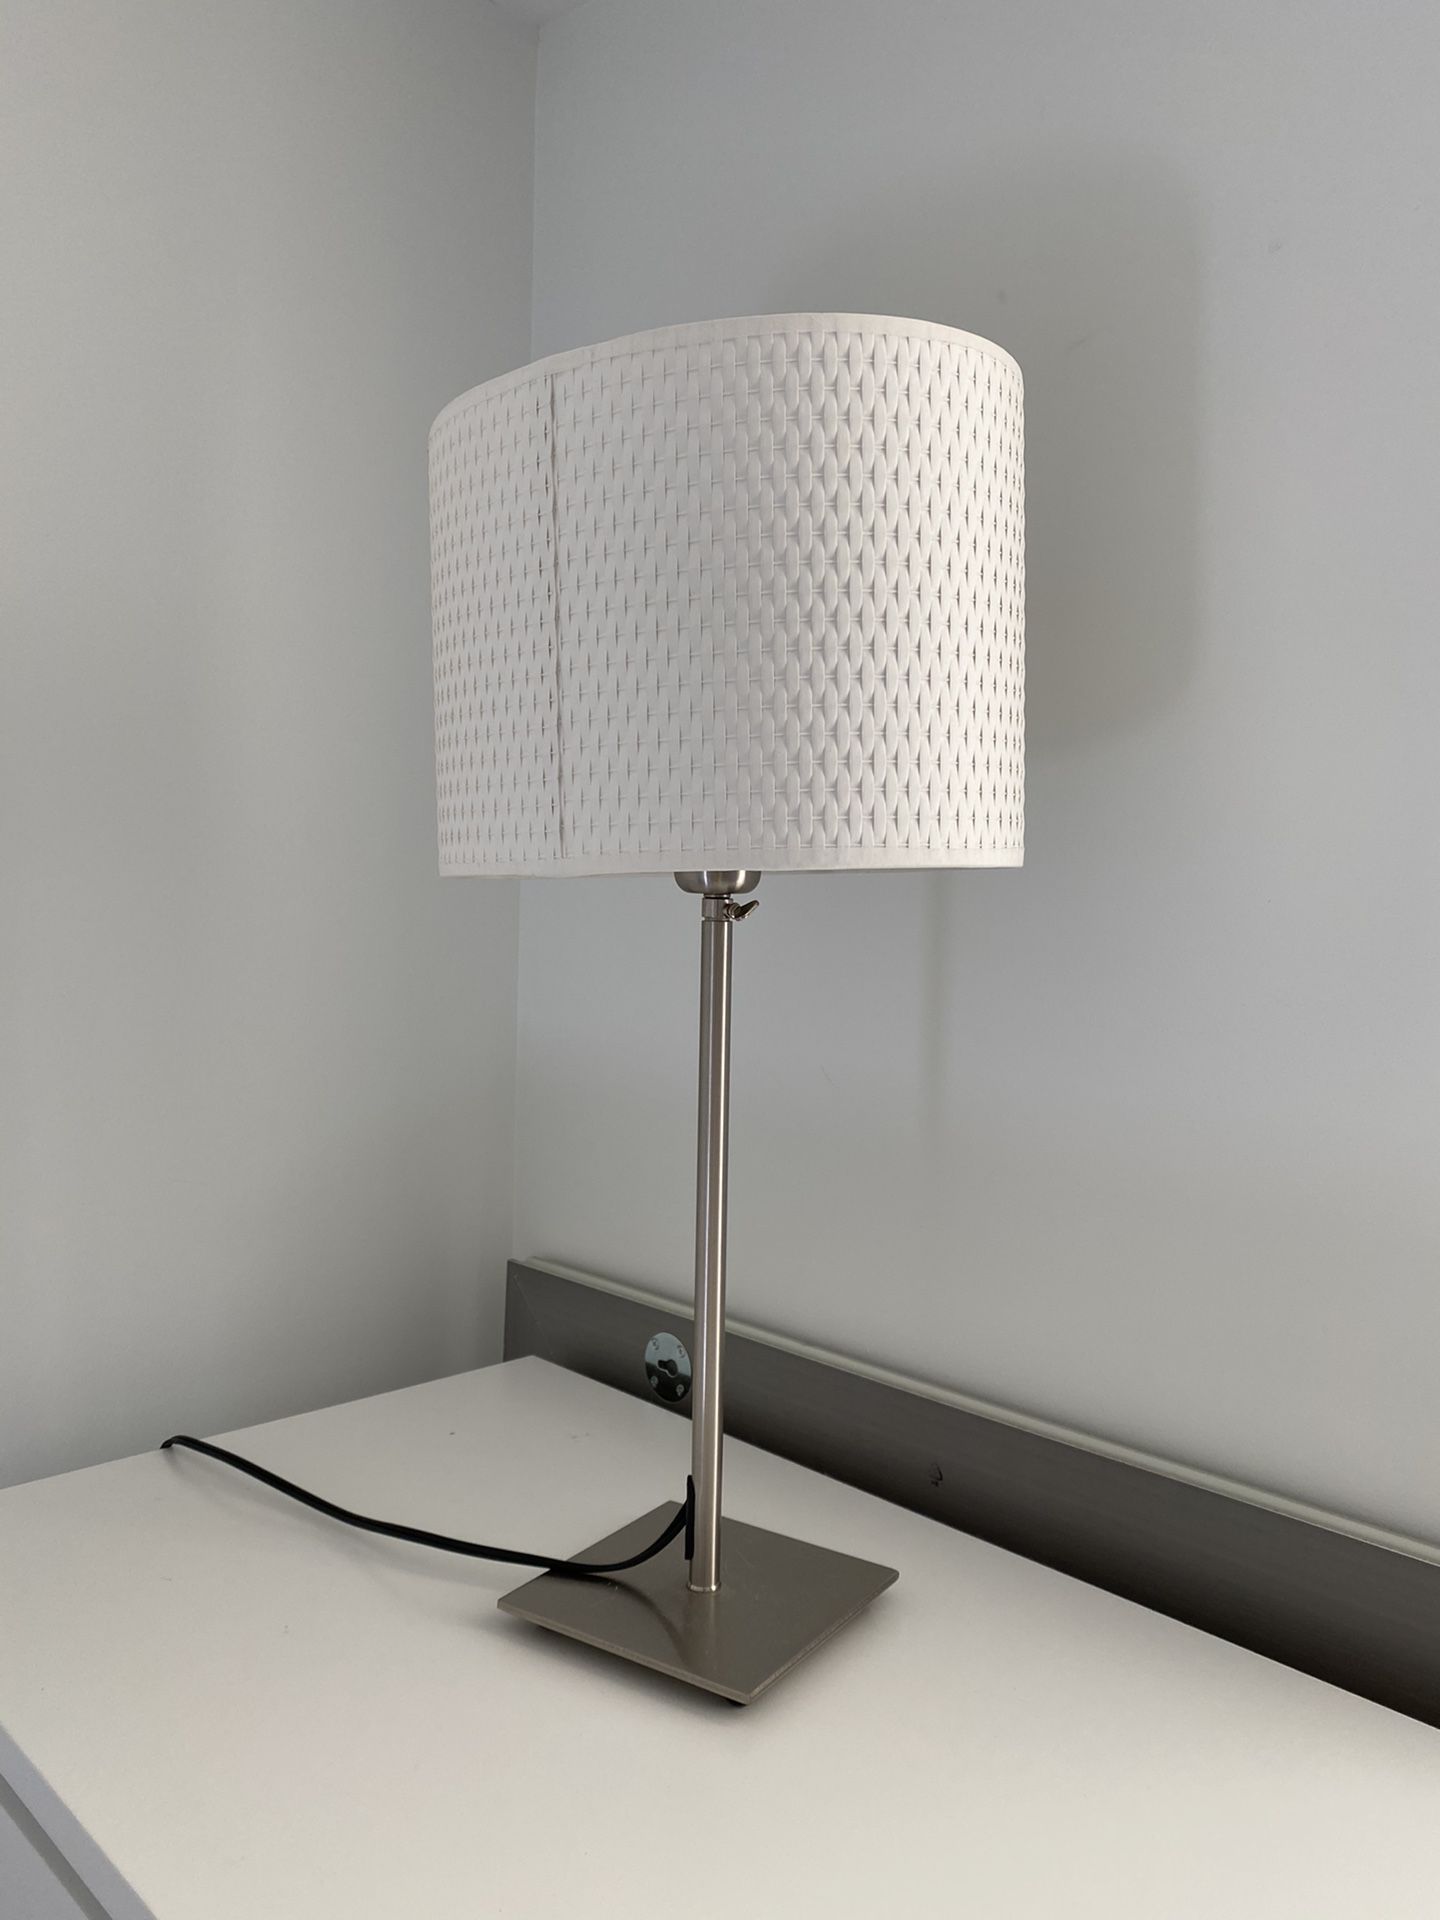 2 bedroom table lamps!